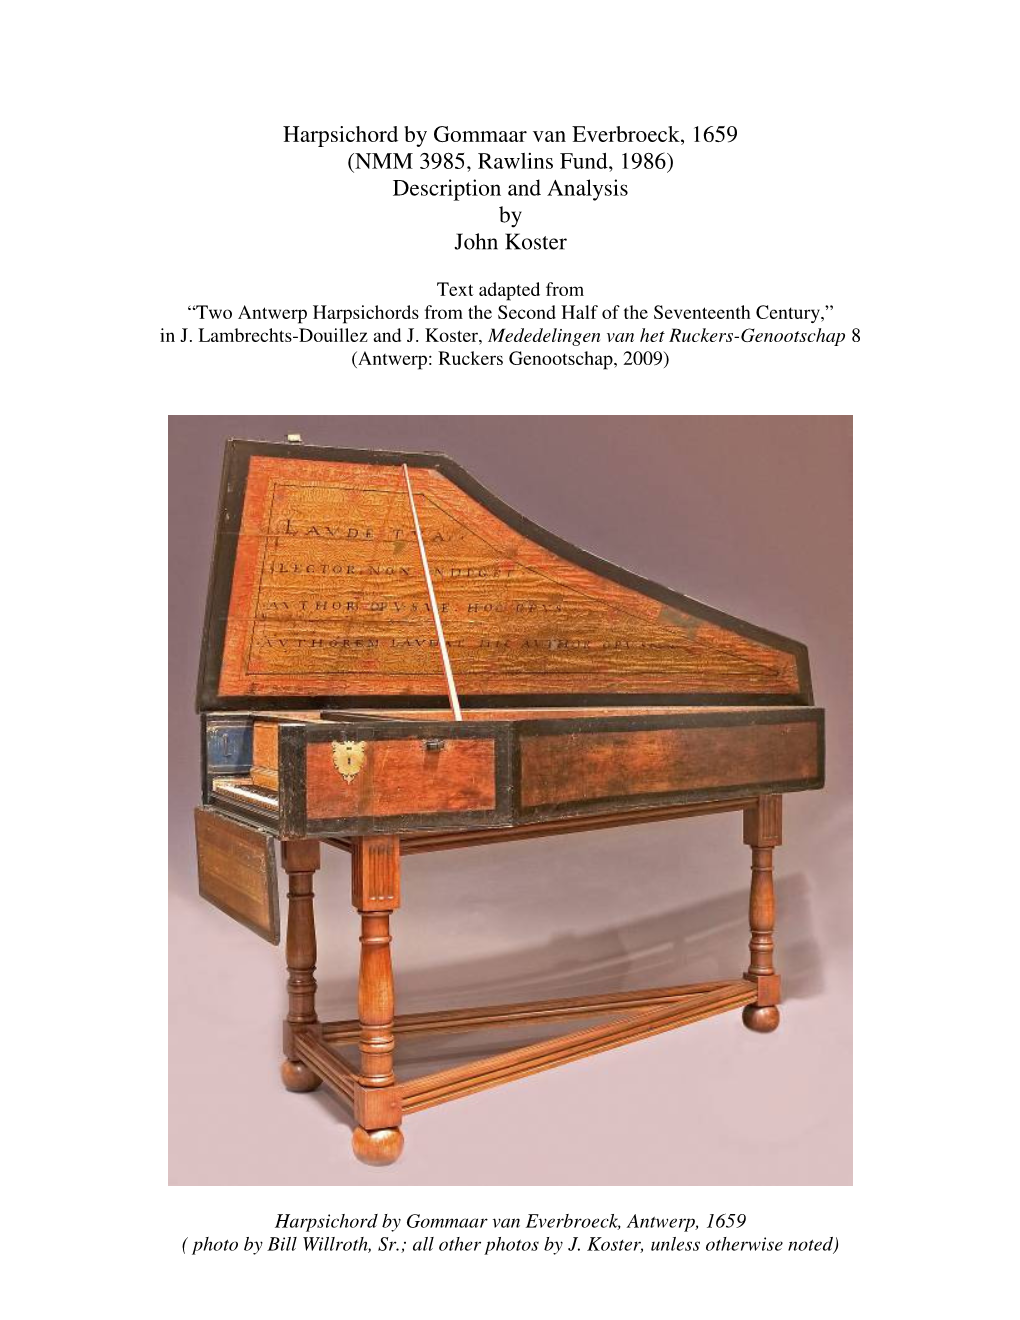 Harpsichord by Gommaar Van Everbroeck, 1659 (NMM 3985, Rawlins Fund, 1986) Description and Analysis by John Koster